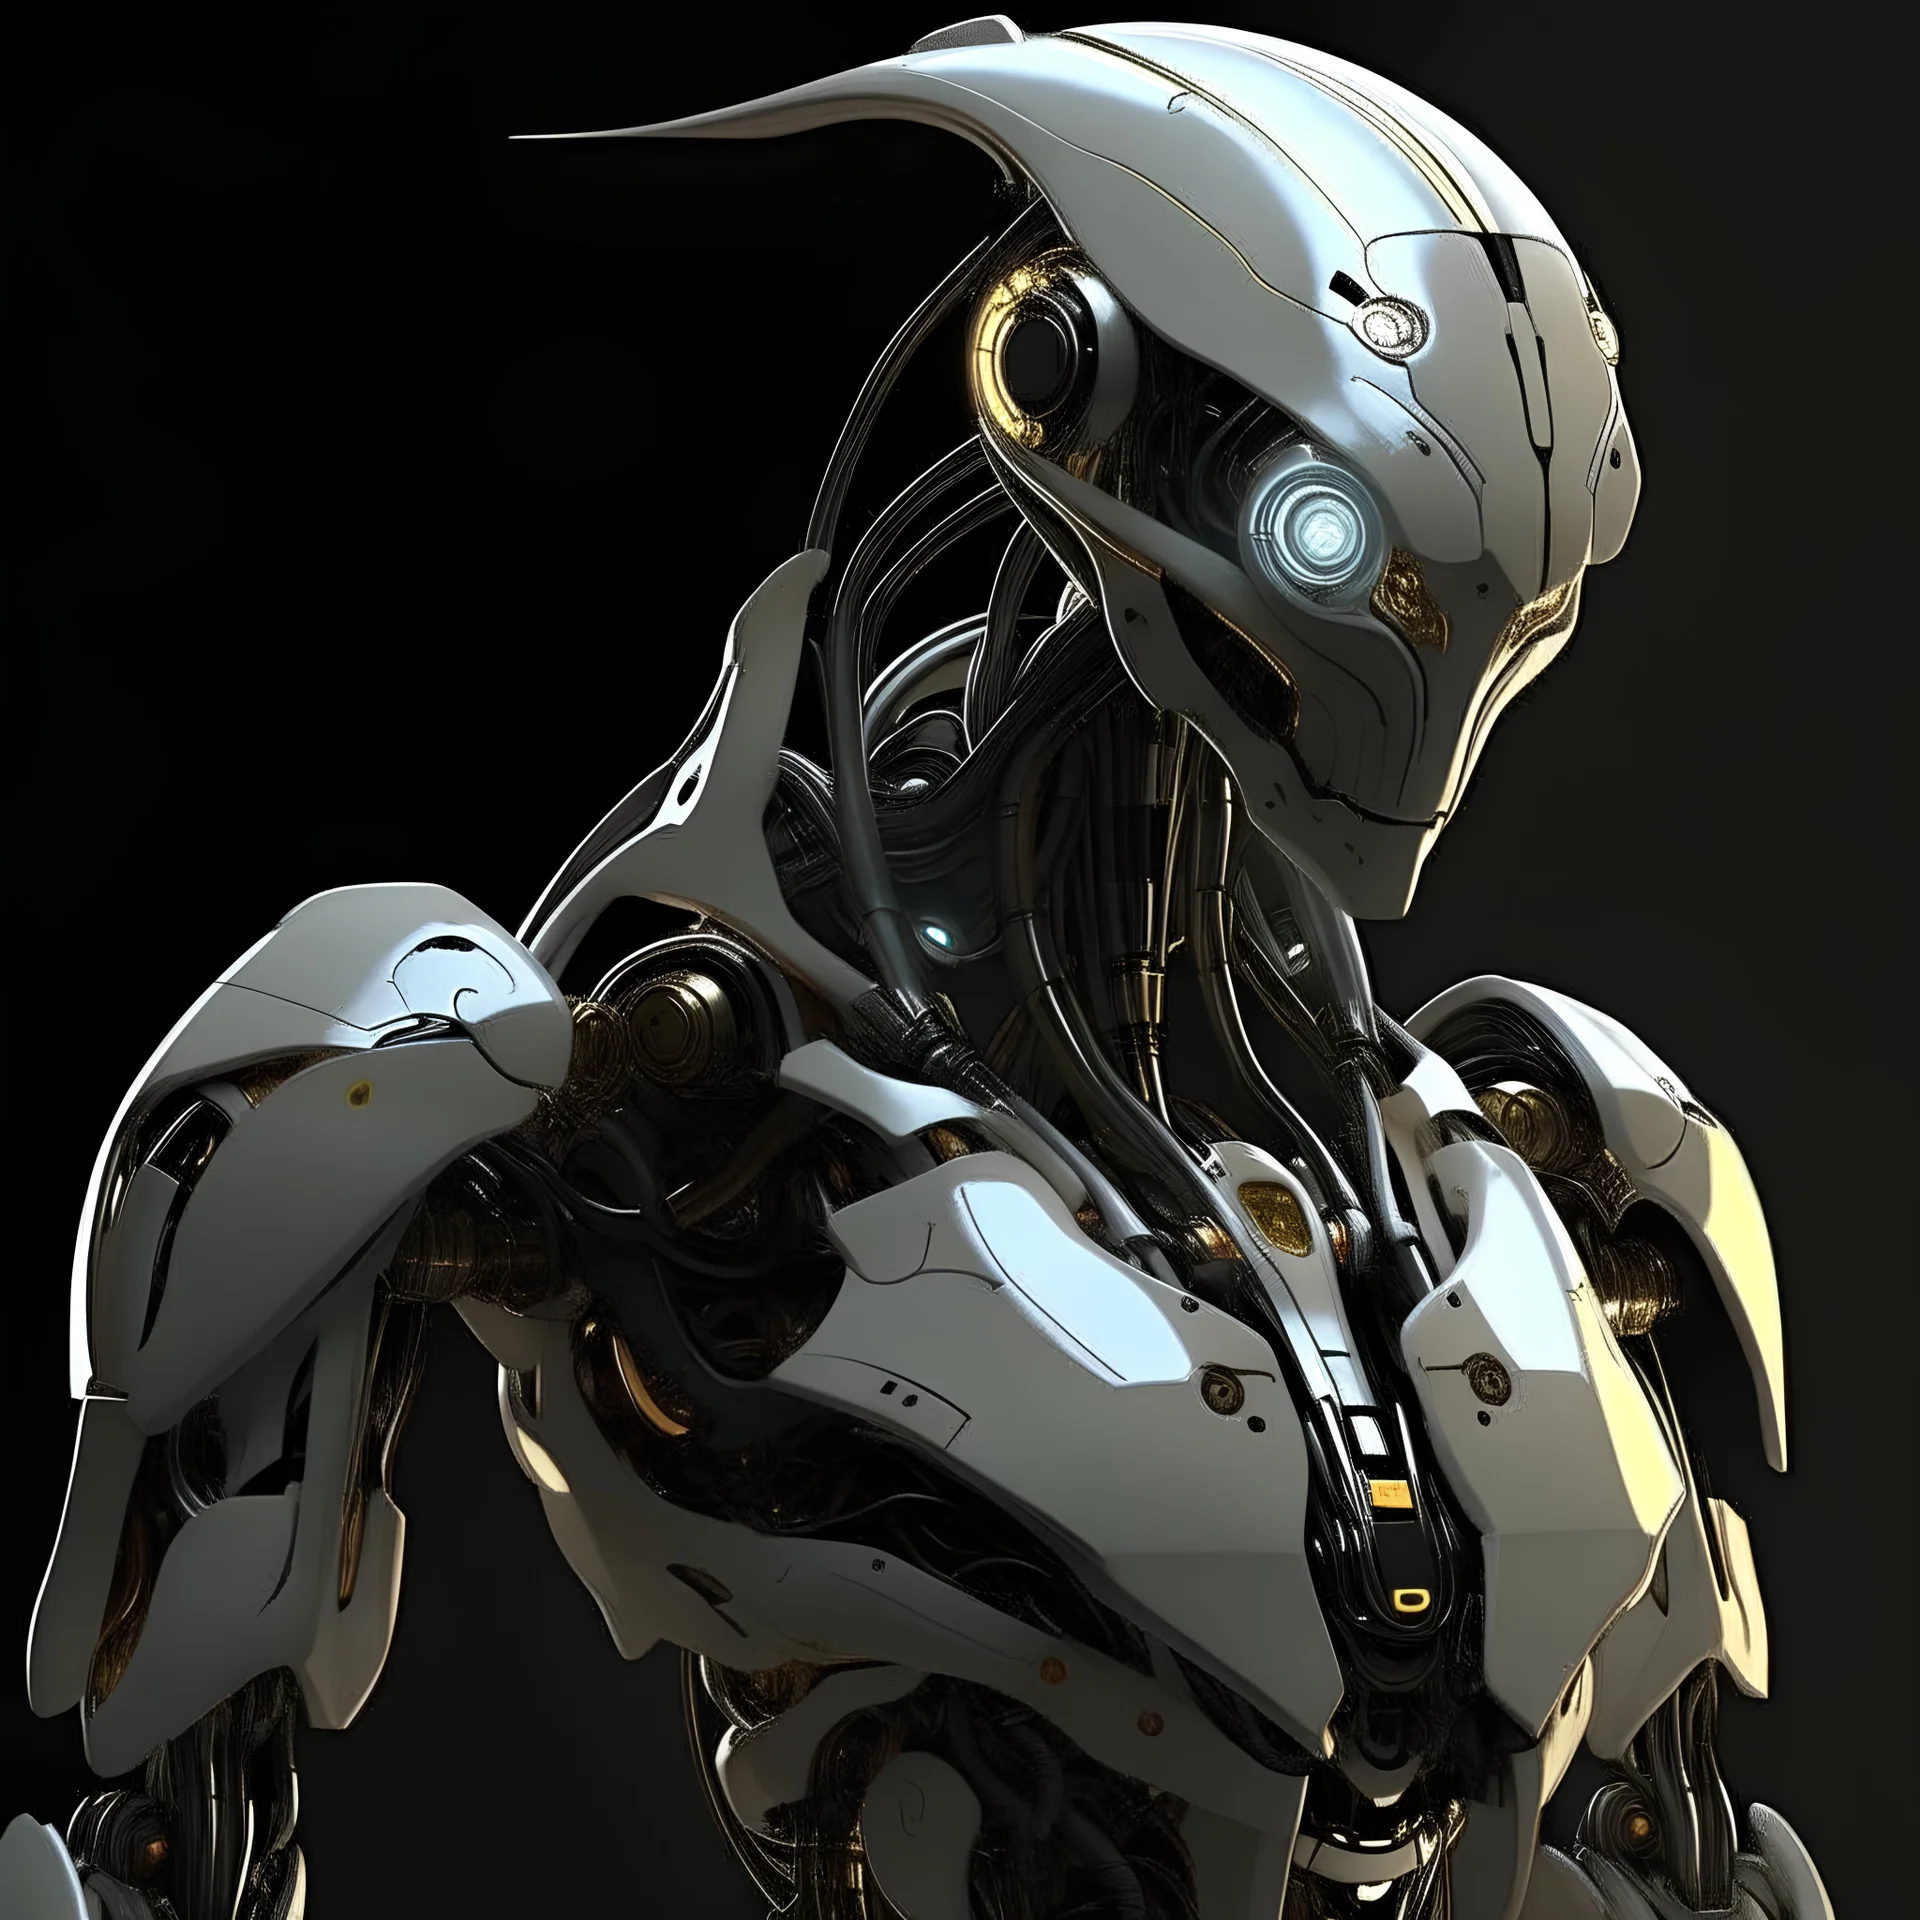 Construct: Head: Streamlined and angular with luminous artificial eyes. Torso: Robust core housing advanced technology and an Argent Energy containment system. Limbs: Sleek robotic arms with retractable razor-sharp claws and biomechanical legs for stability. Movement: Fluid and precise, showcasing calculated grace.